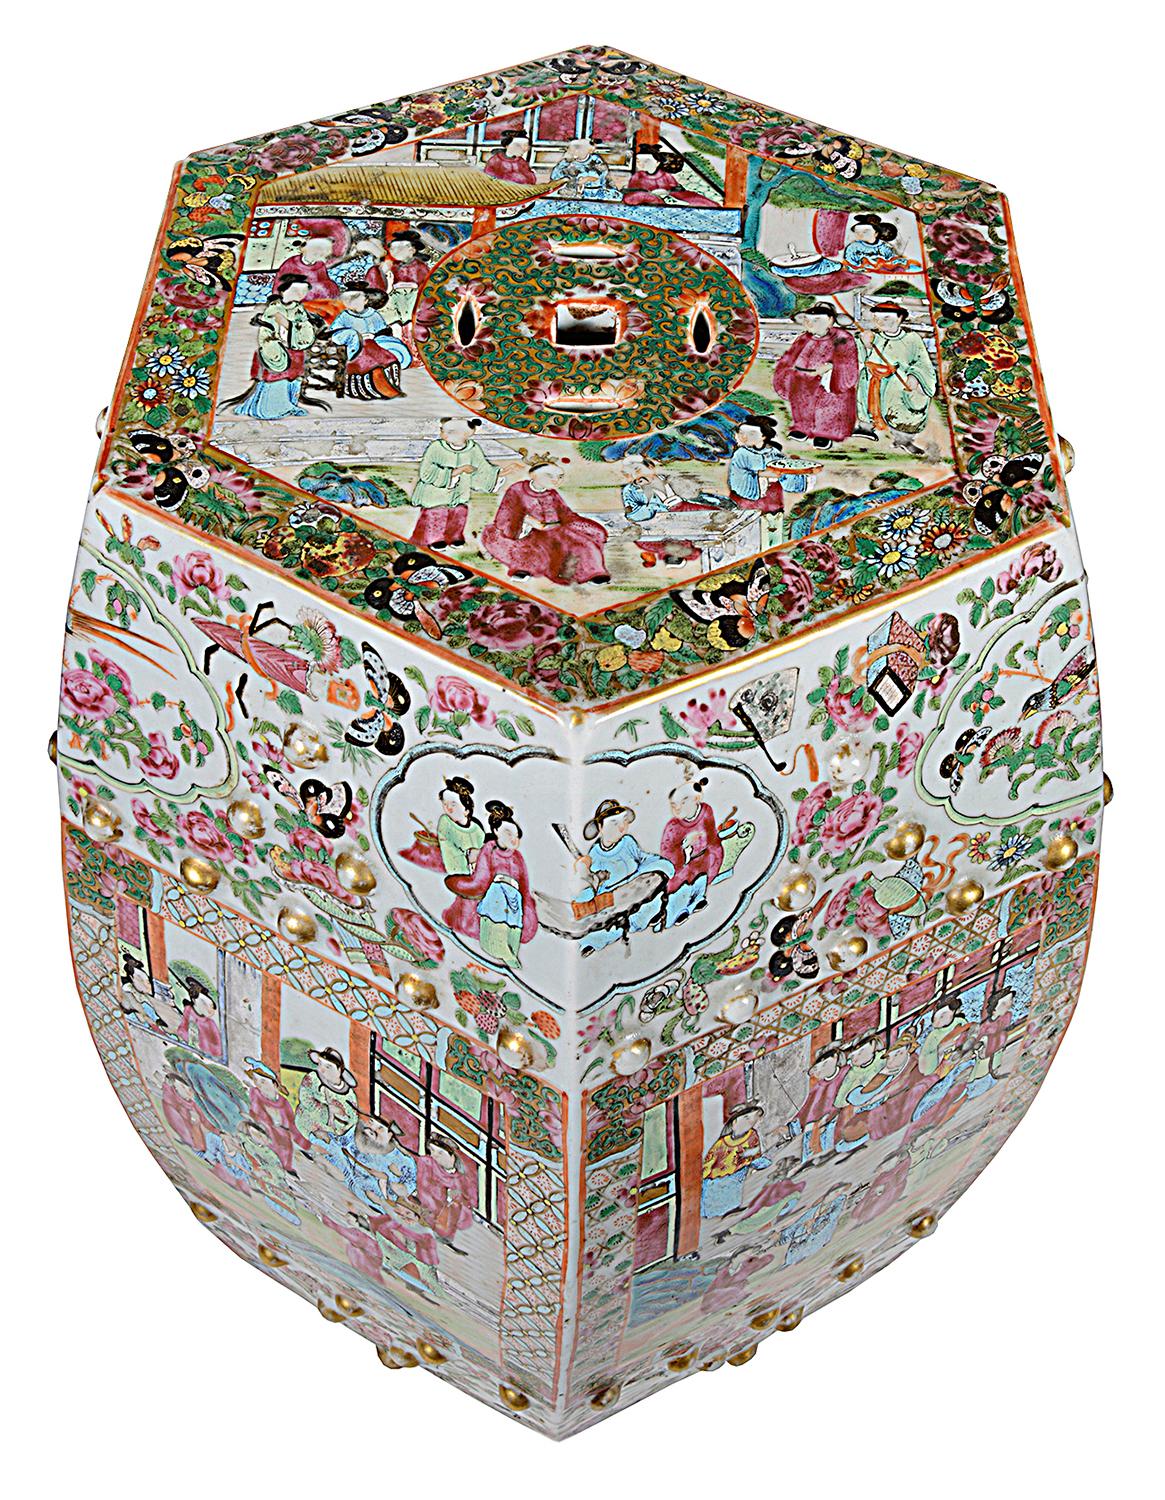 Hand-Painted 19th Century Chinese Canton / Rose Medallion Garden Seat For Sale